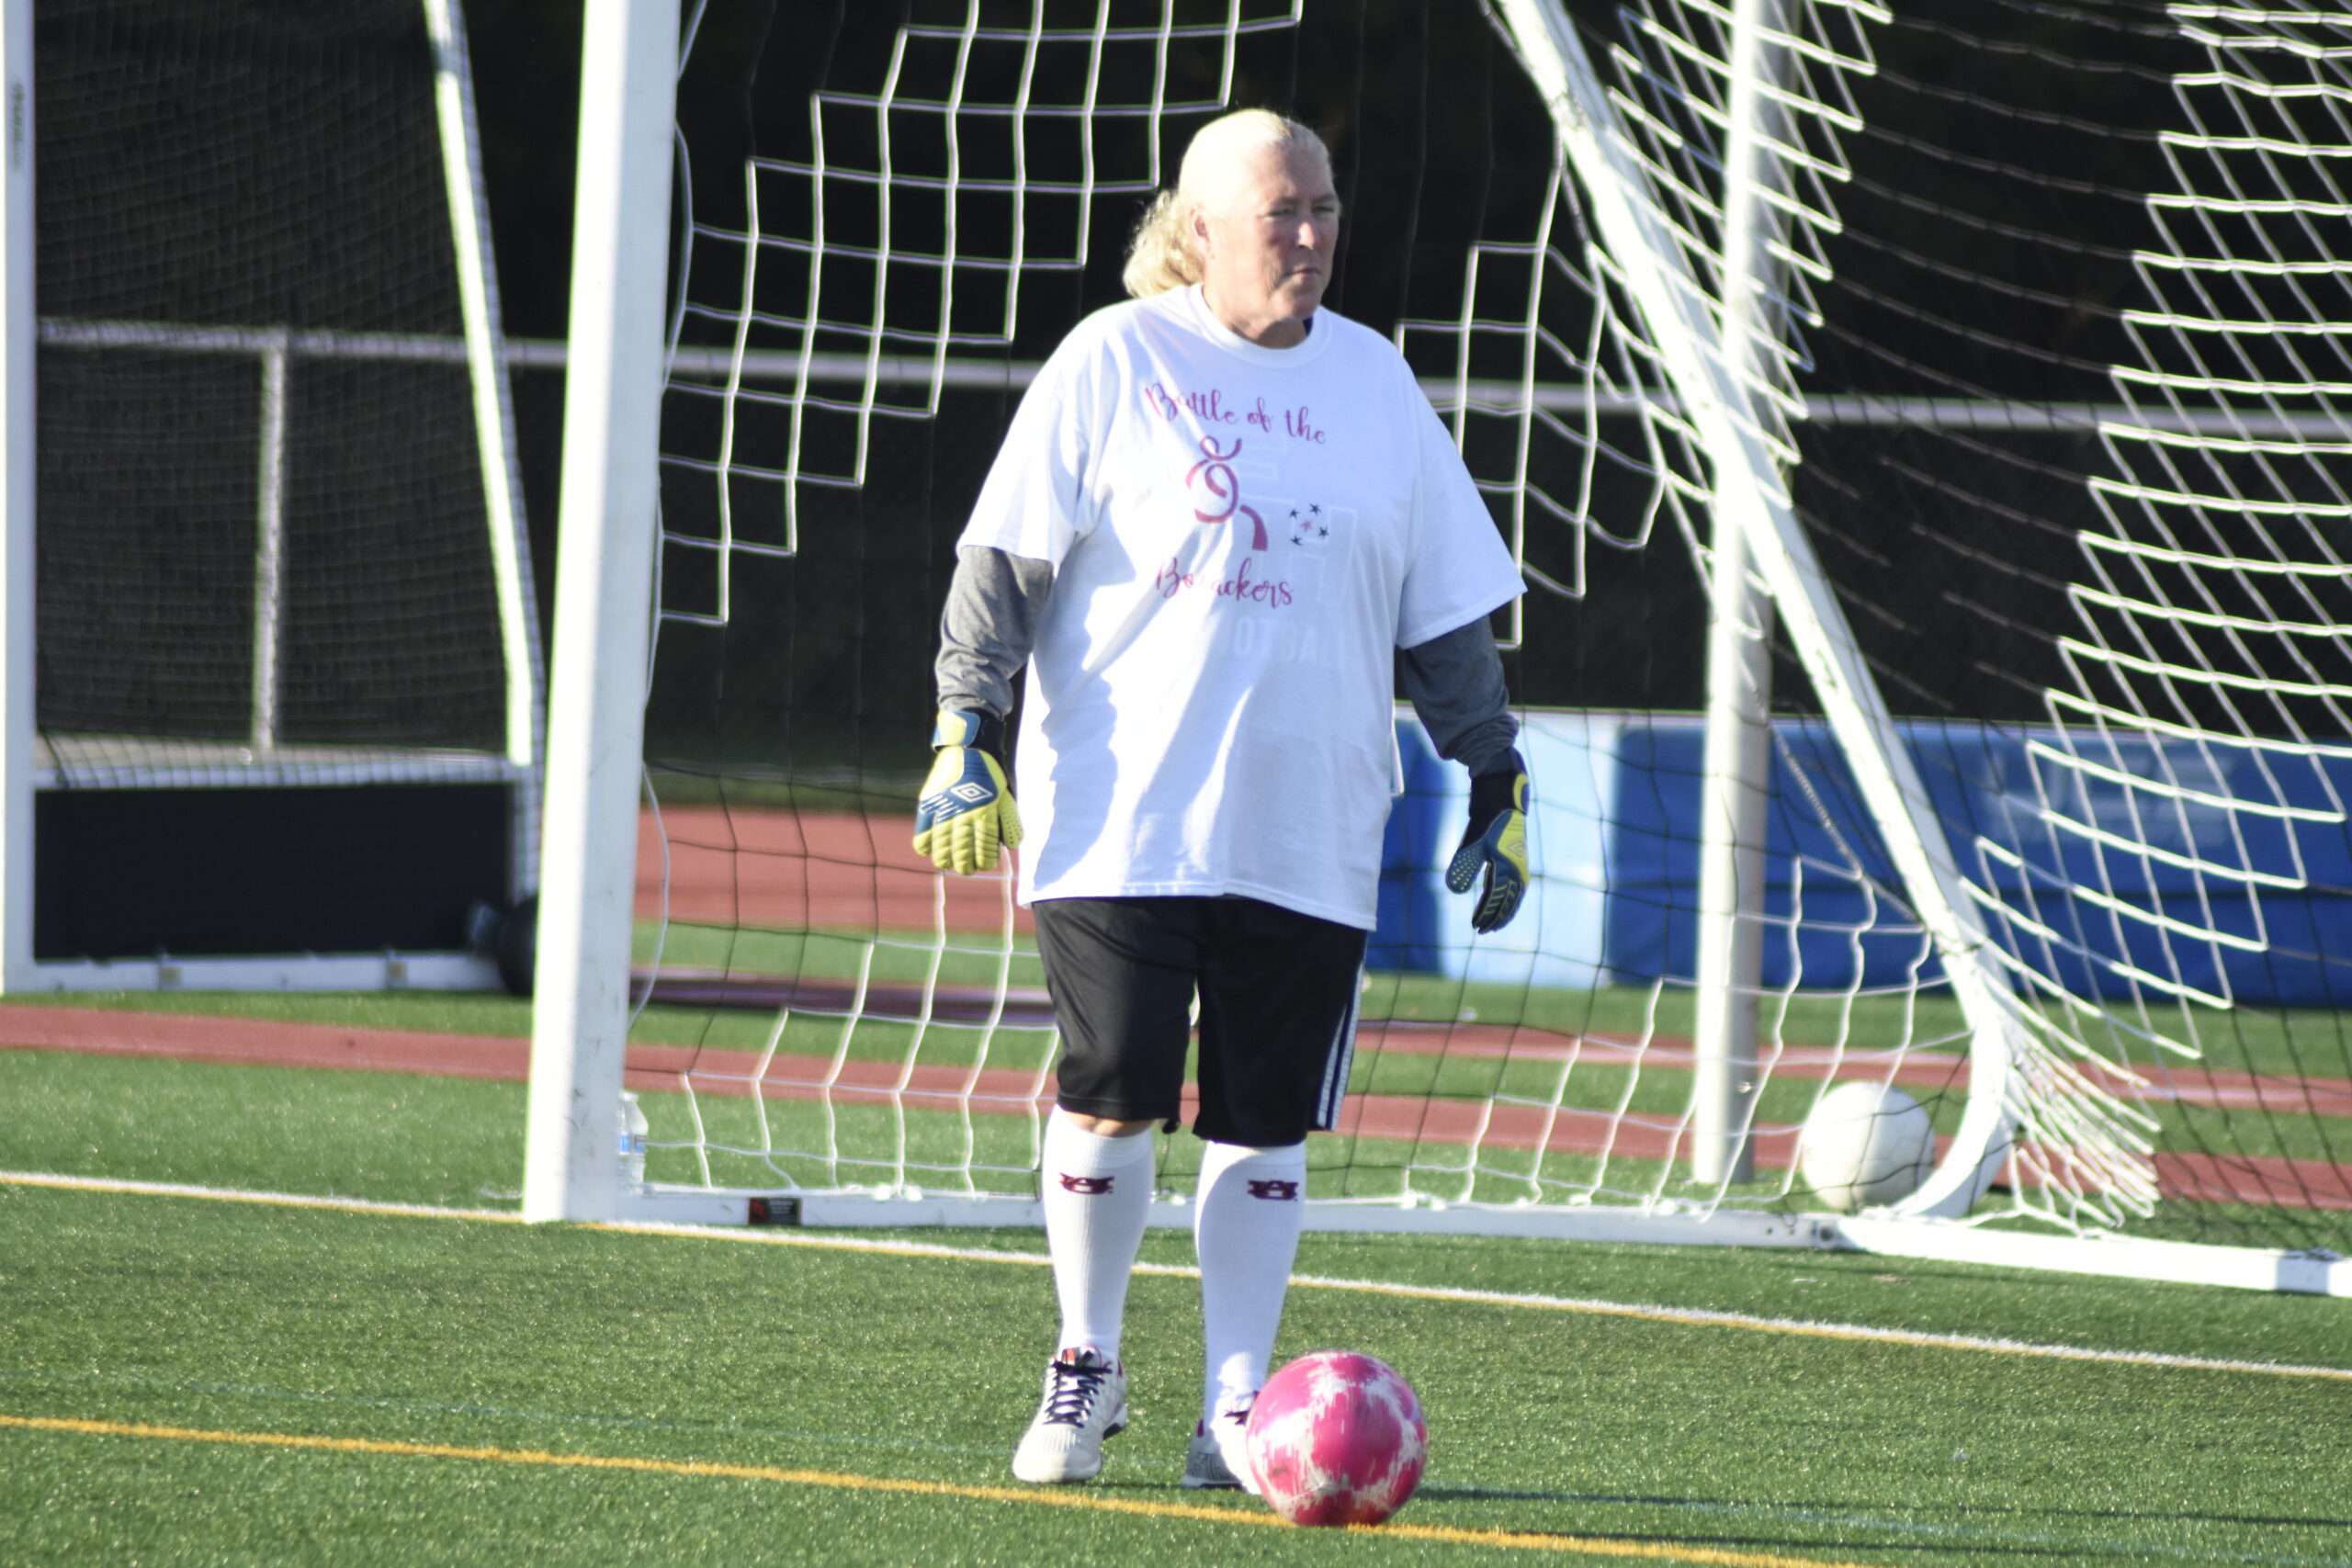 East Hampton Athletic Director Kathy Masterson played goalie for the white team.   DREW BUDD